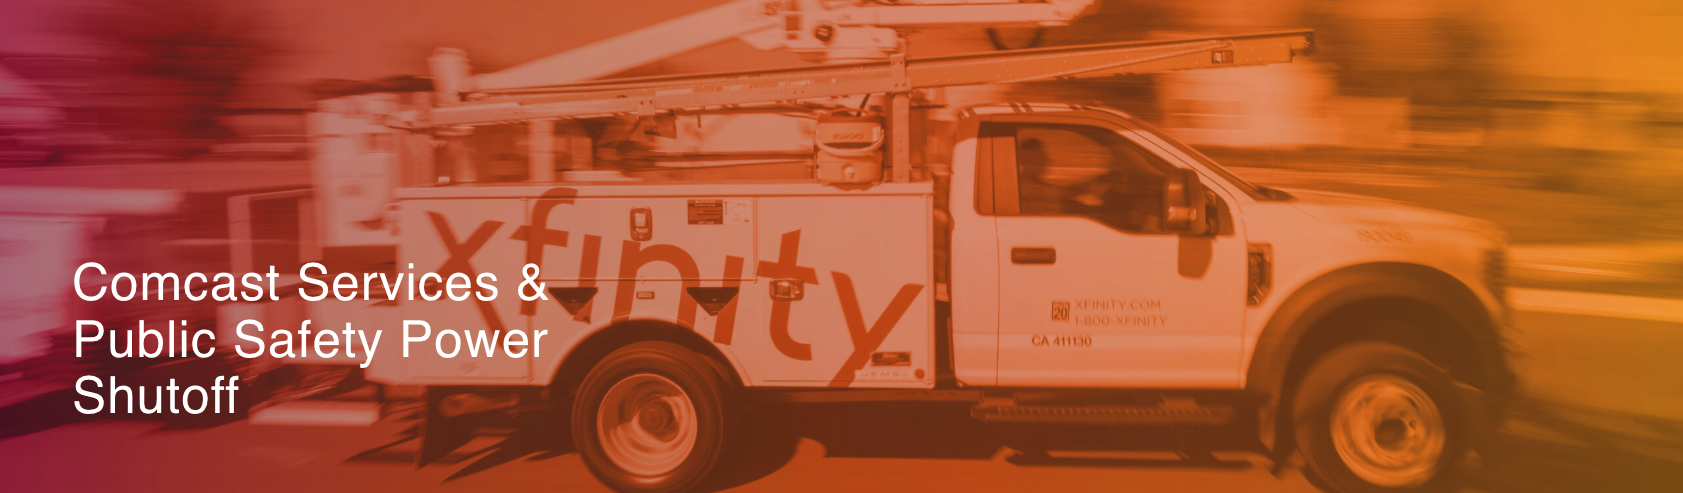 Planning for Power Shutoffs: Here's What You Need to Know About Comcast Services